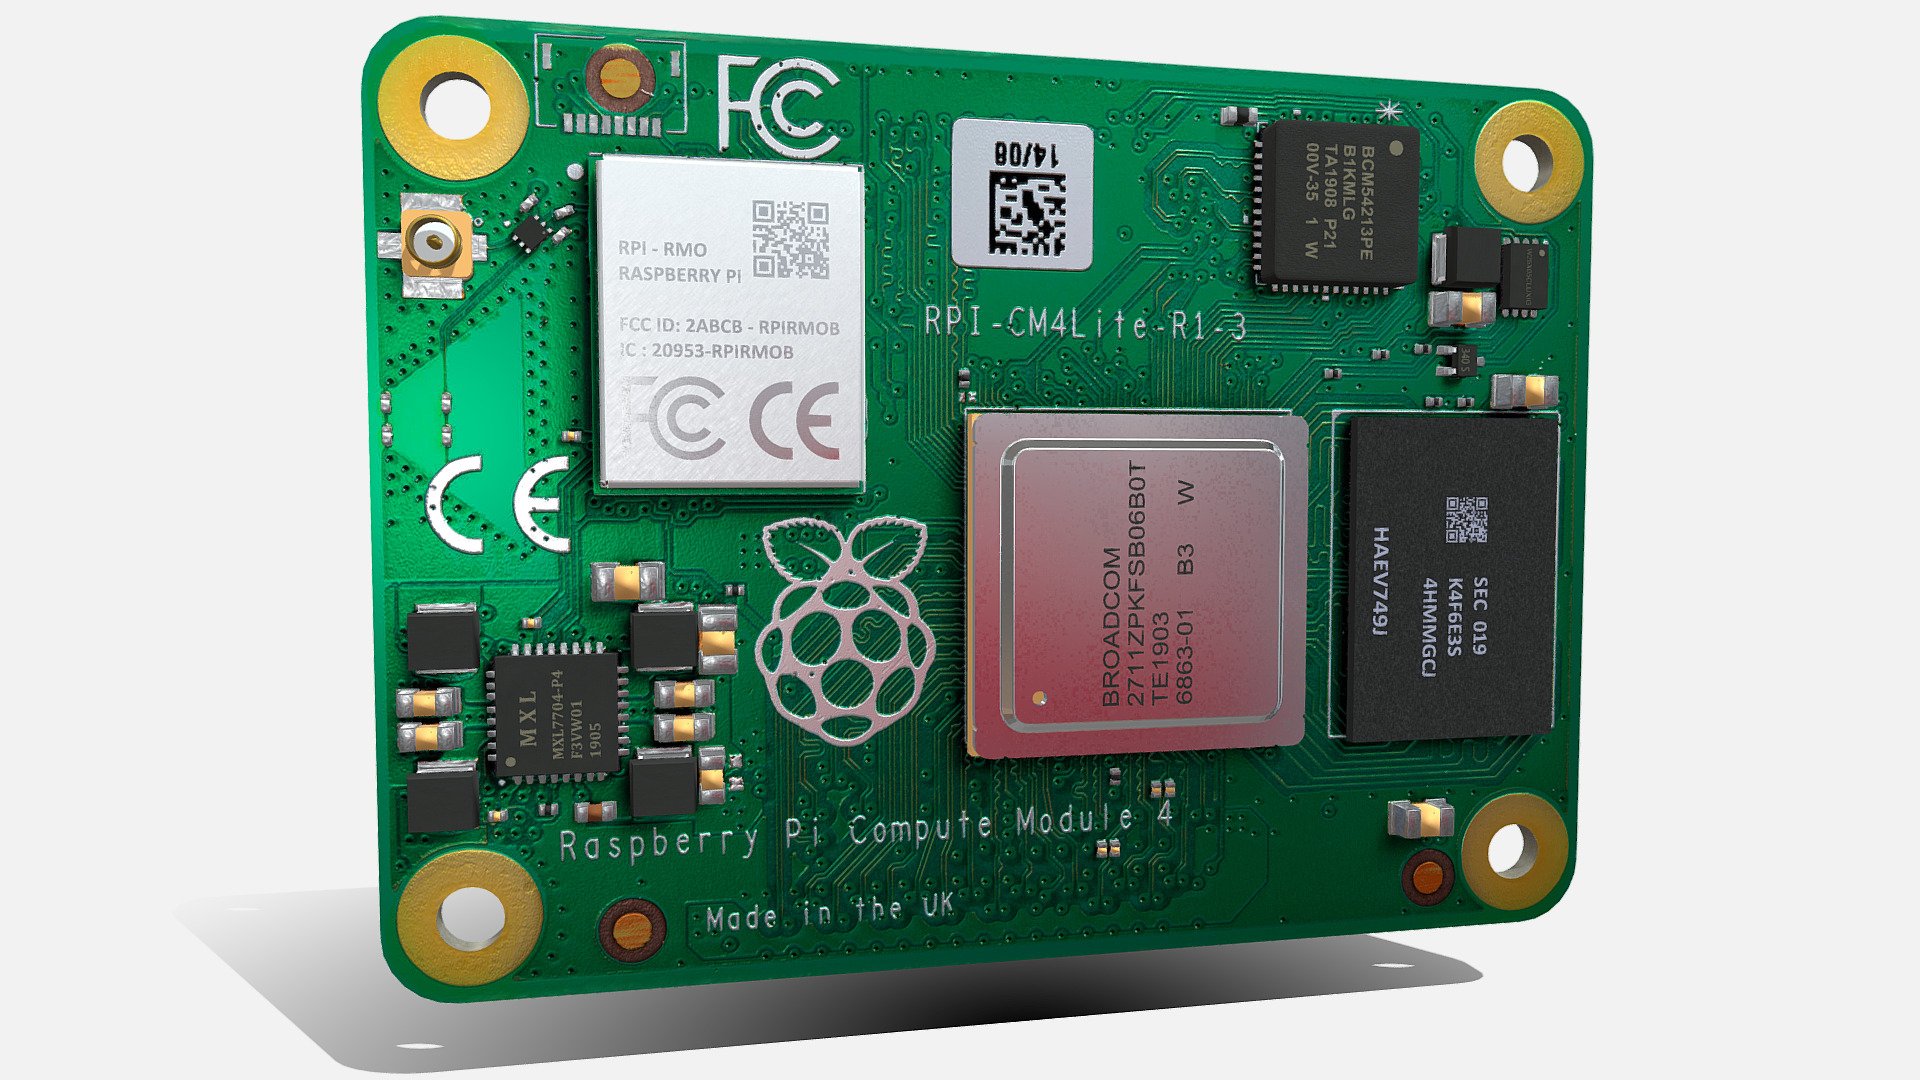 HIGH POLY 3D Model of the new RaspBerry Compute Module 4 Lite. Version without eMMC.
Description is visible here : https://www.raspberrypi.org/products/compute-module-4/?variant=raspberry-pi-cm4001000&amp;resellerType=home

The 3D Model of the version with eMMC + Antenna Wifi is available here : https://sketchfab.com/3d-models/raspberry-pi-compute-module-4-emmc-antenna-d476d8e1cbab41a89464ae467ad934ba

Model designed with blender tools v2.81. 

All components can be modified (translate, delete,…). Don’t hesitate to comment somes hardware references that you want to see in sketchfab 3d model